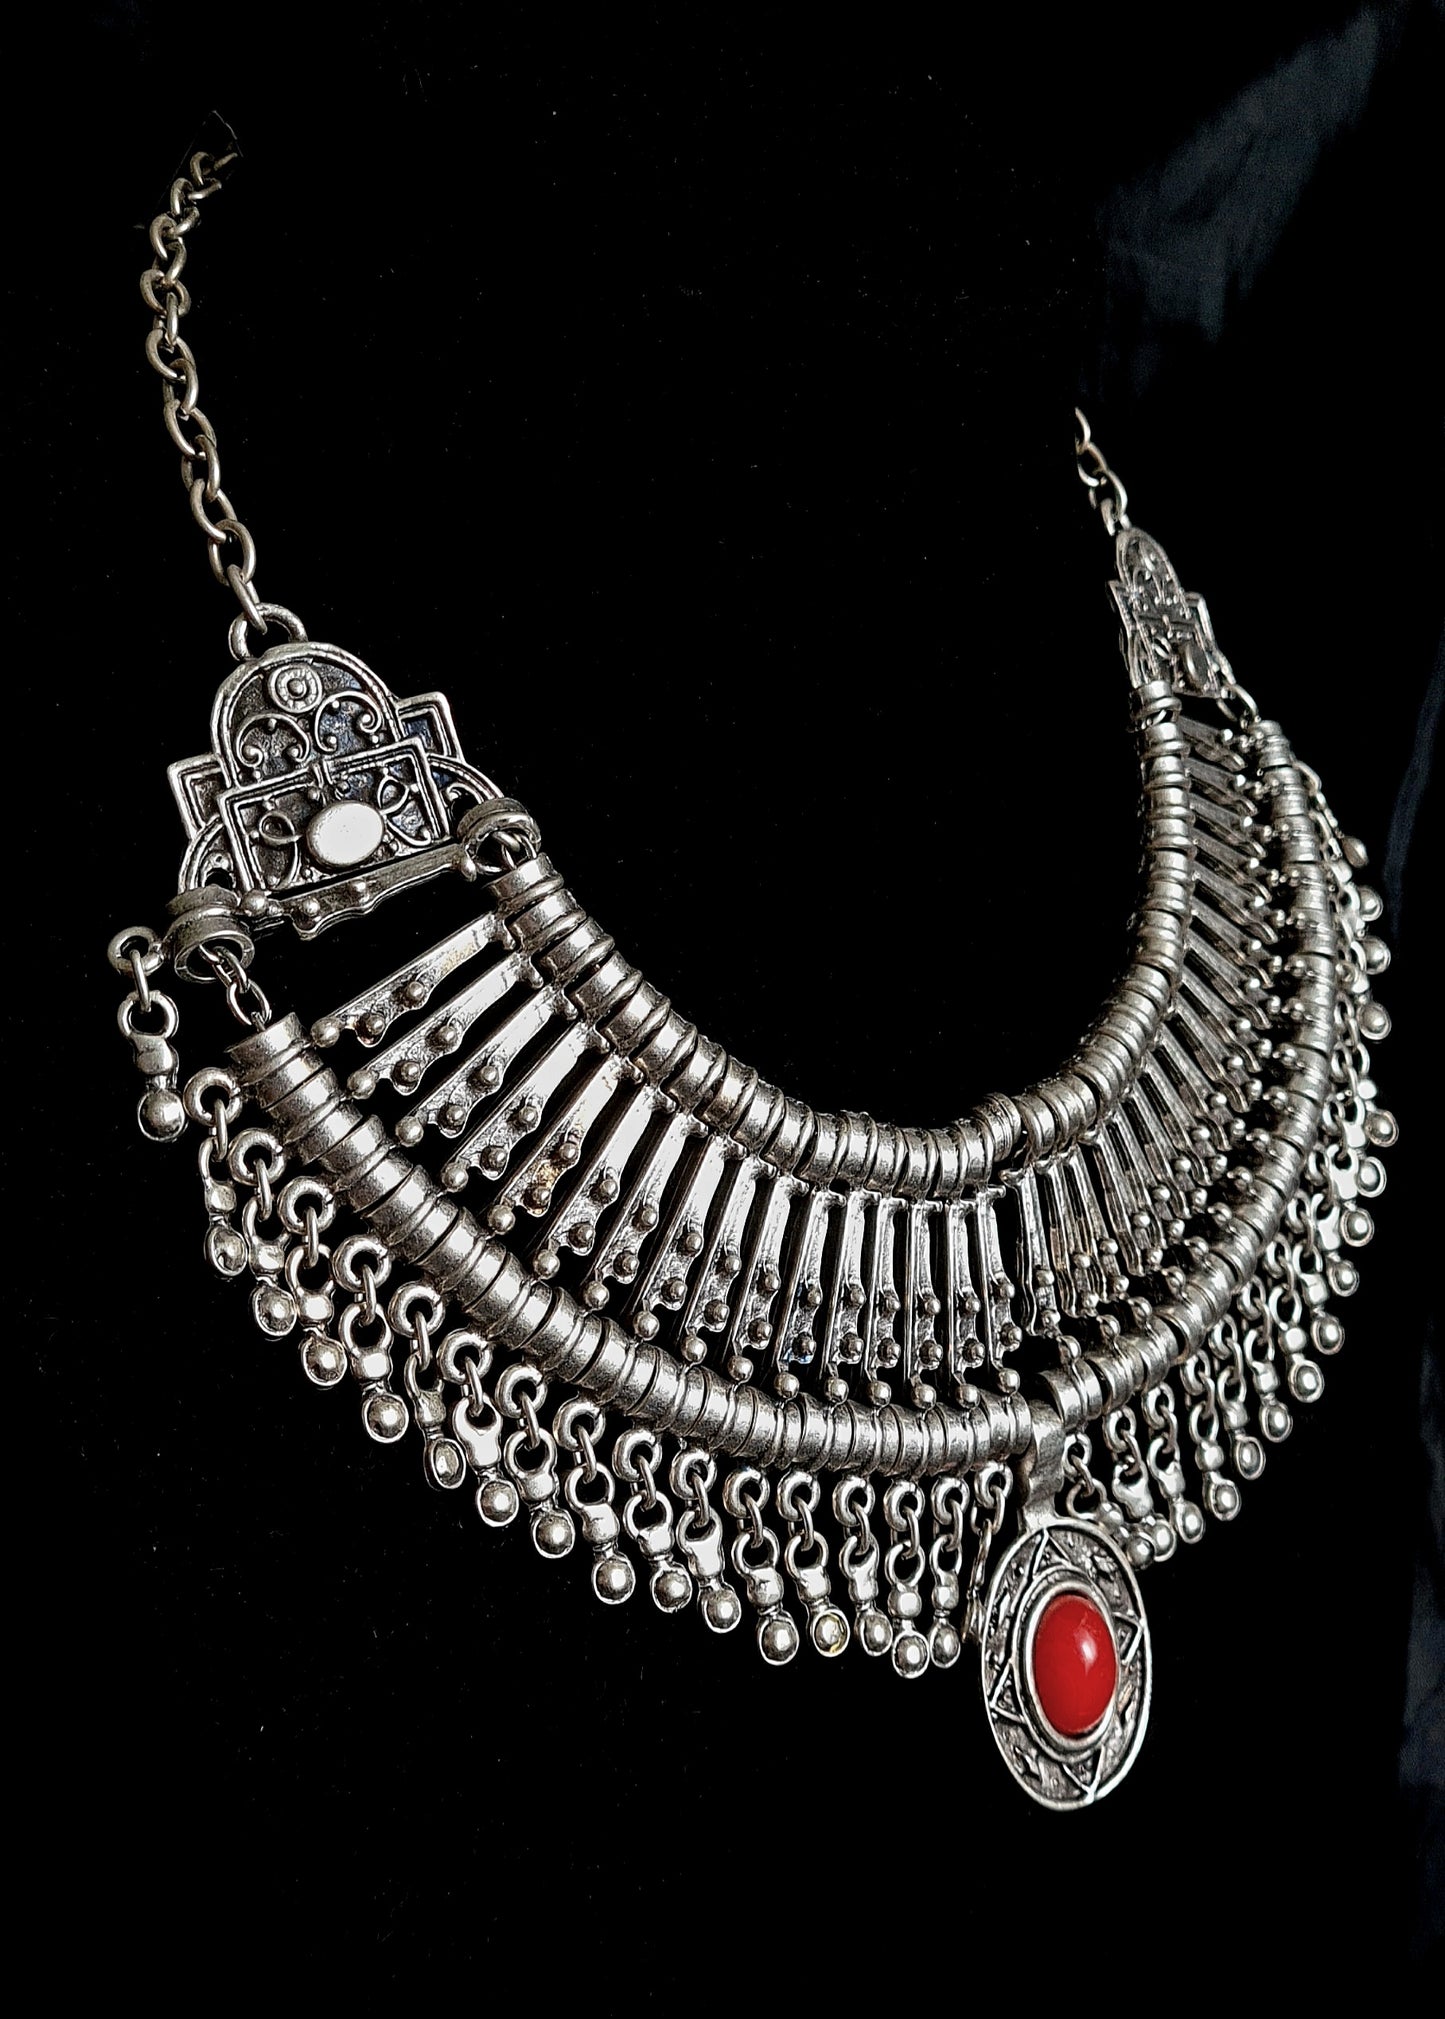 side view of A silver and red necklace on a black background. The necklace is a long, filigree chain with a drop-shaped pendant. The pendant is made of silver and has a red stone in the center. The stone is a deep red color and has a polished finish. The background is a black velvet cloth.